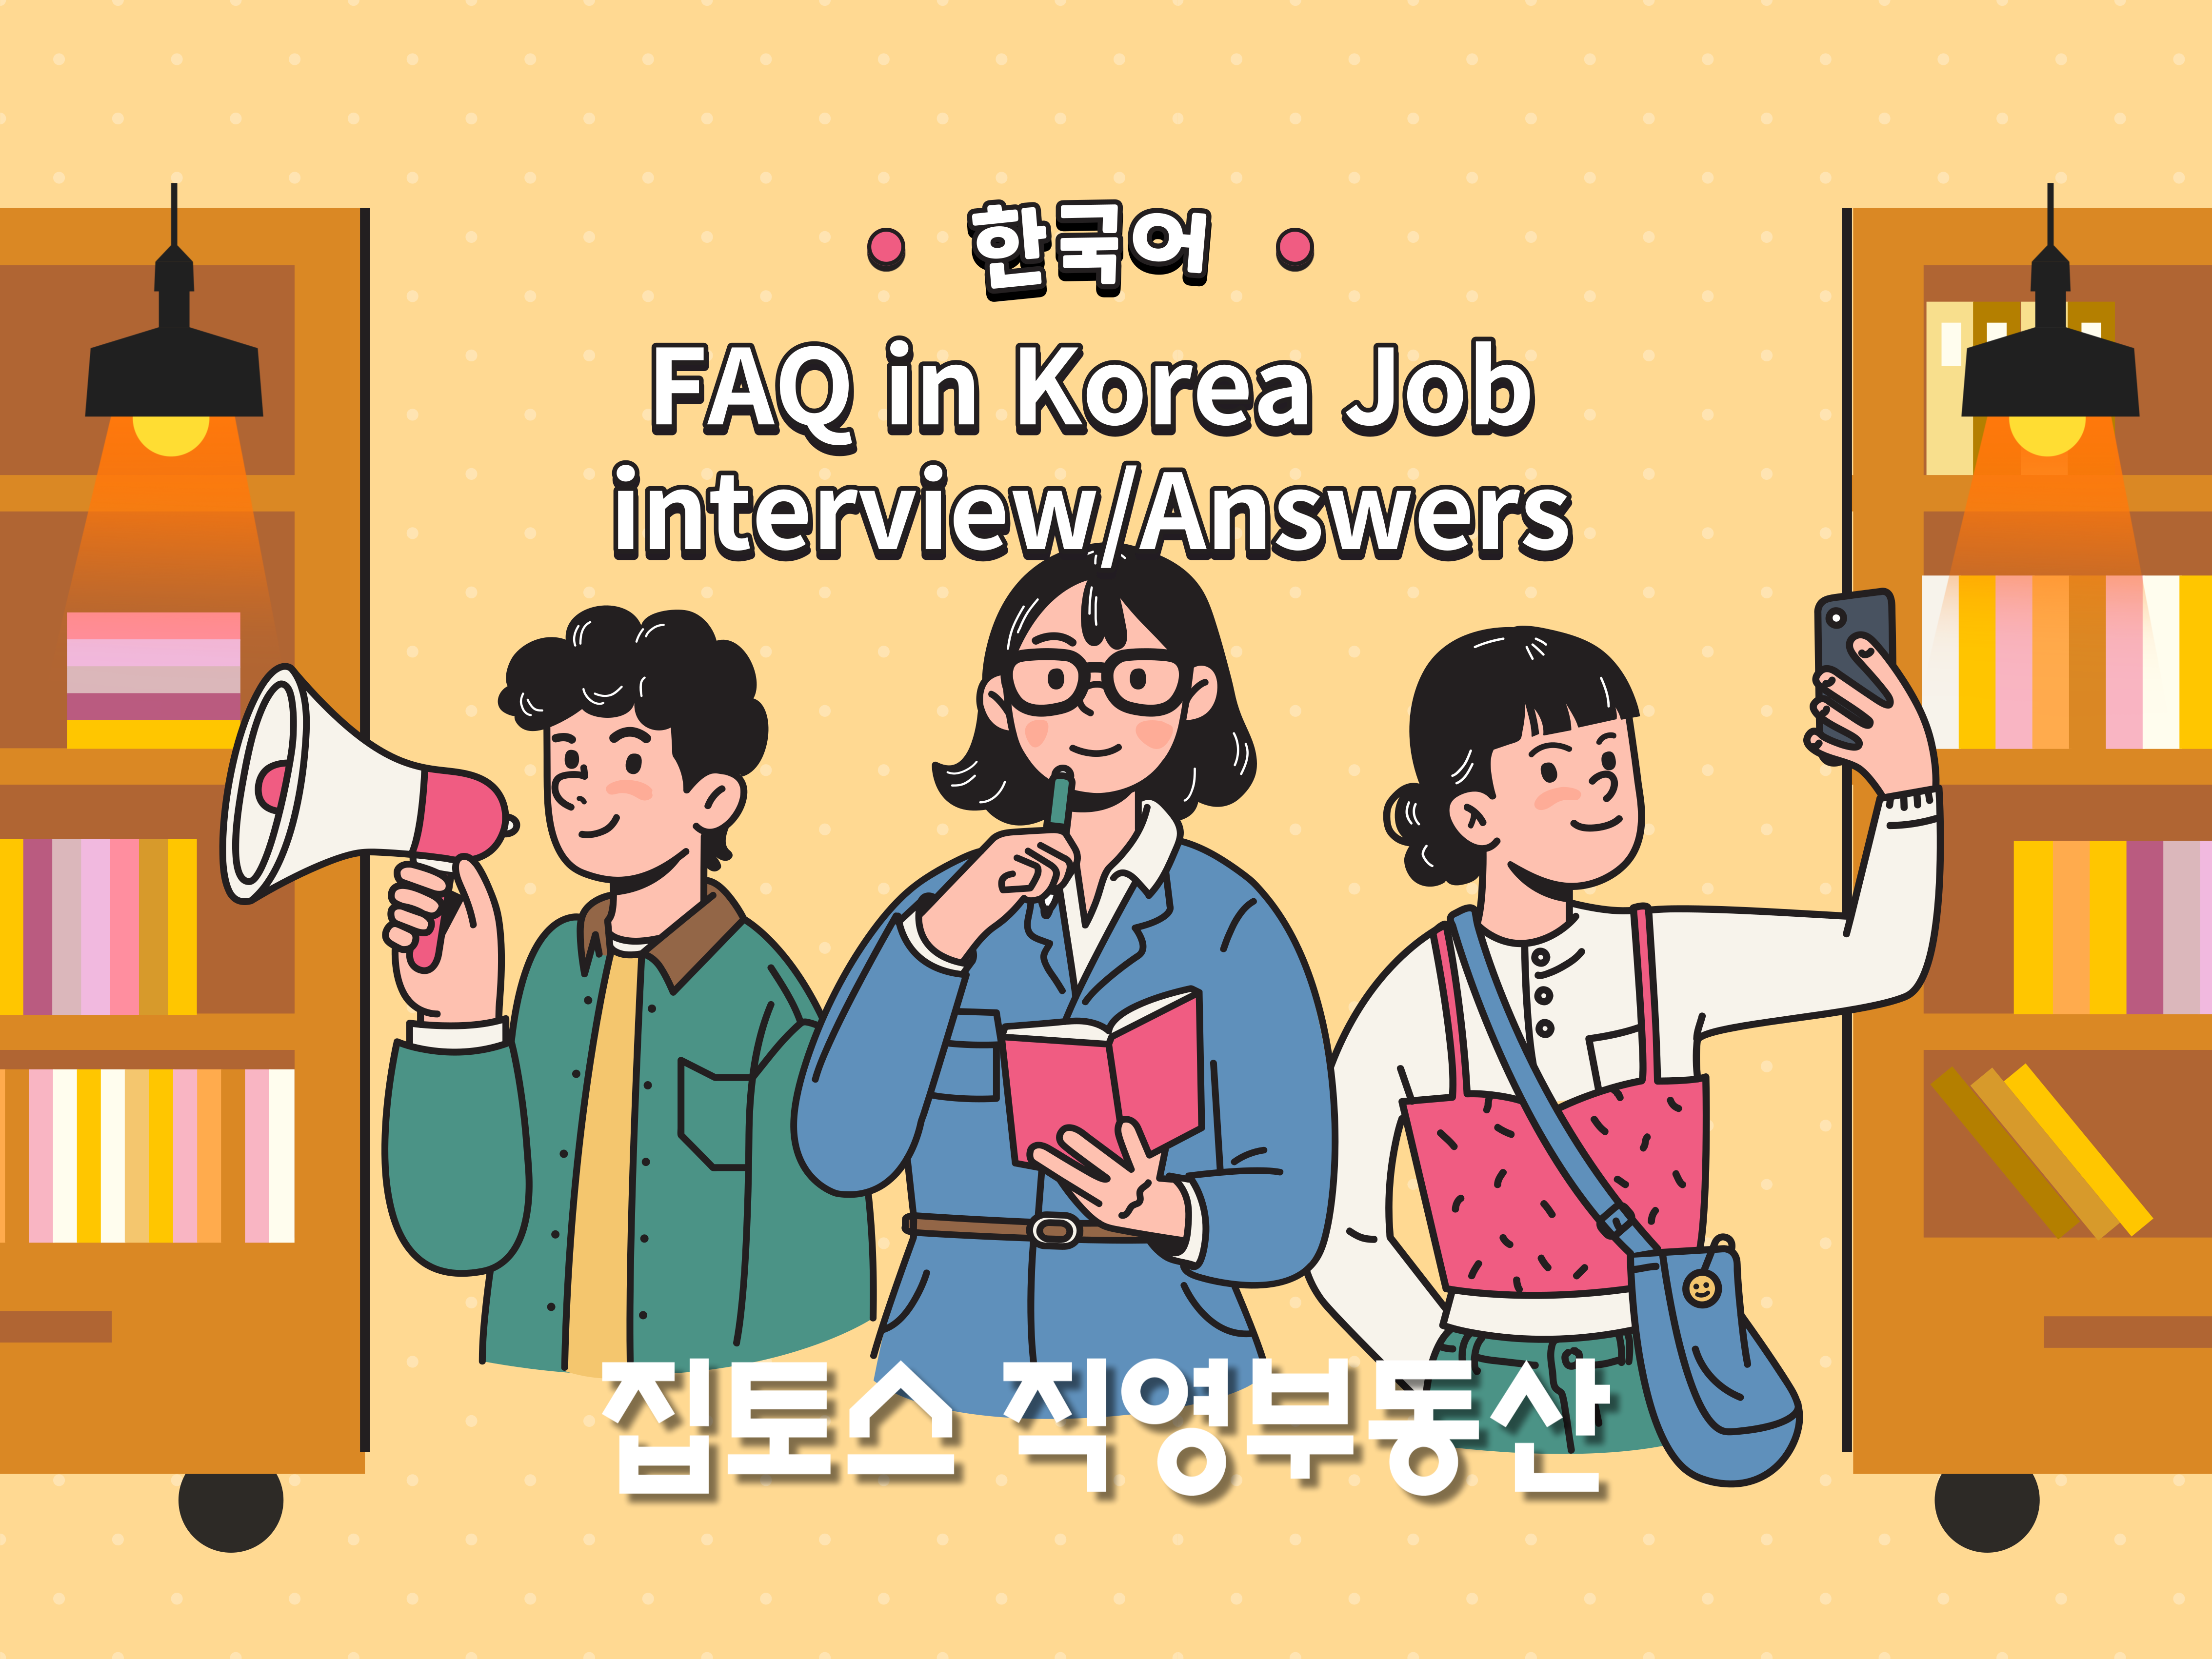 [Useful tips for living in Korea] FAQ in Korea Job interview/Answers